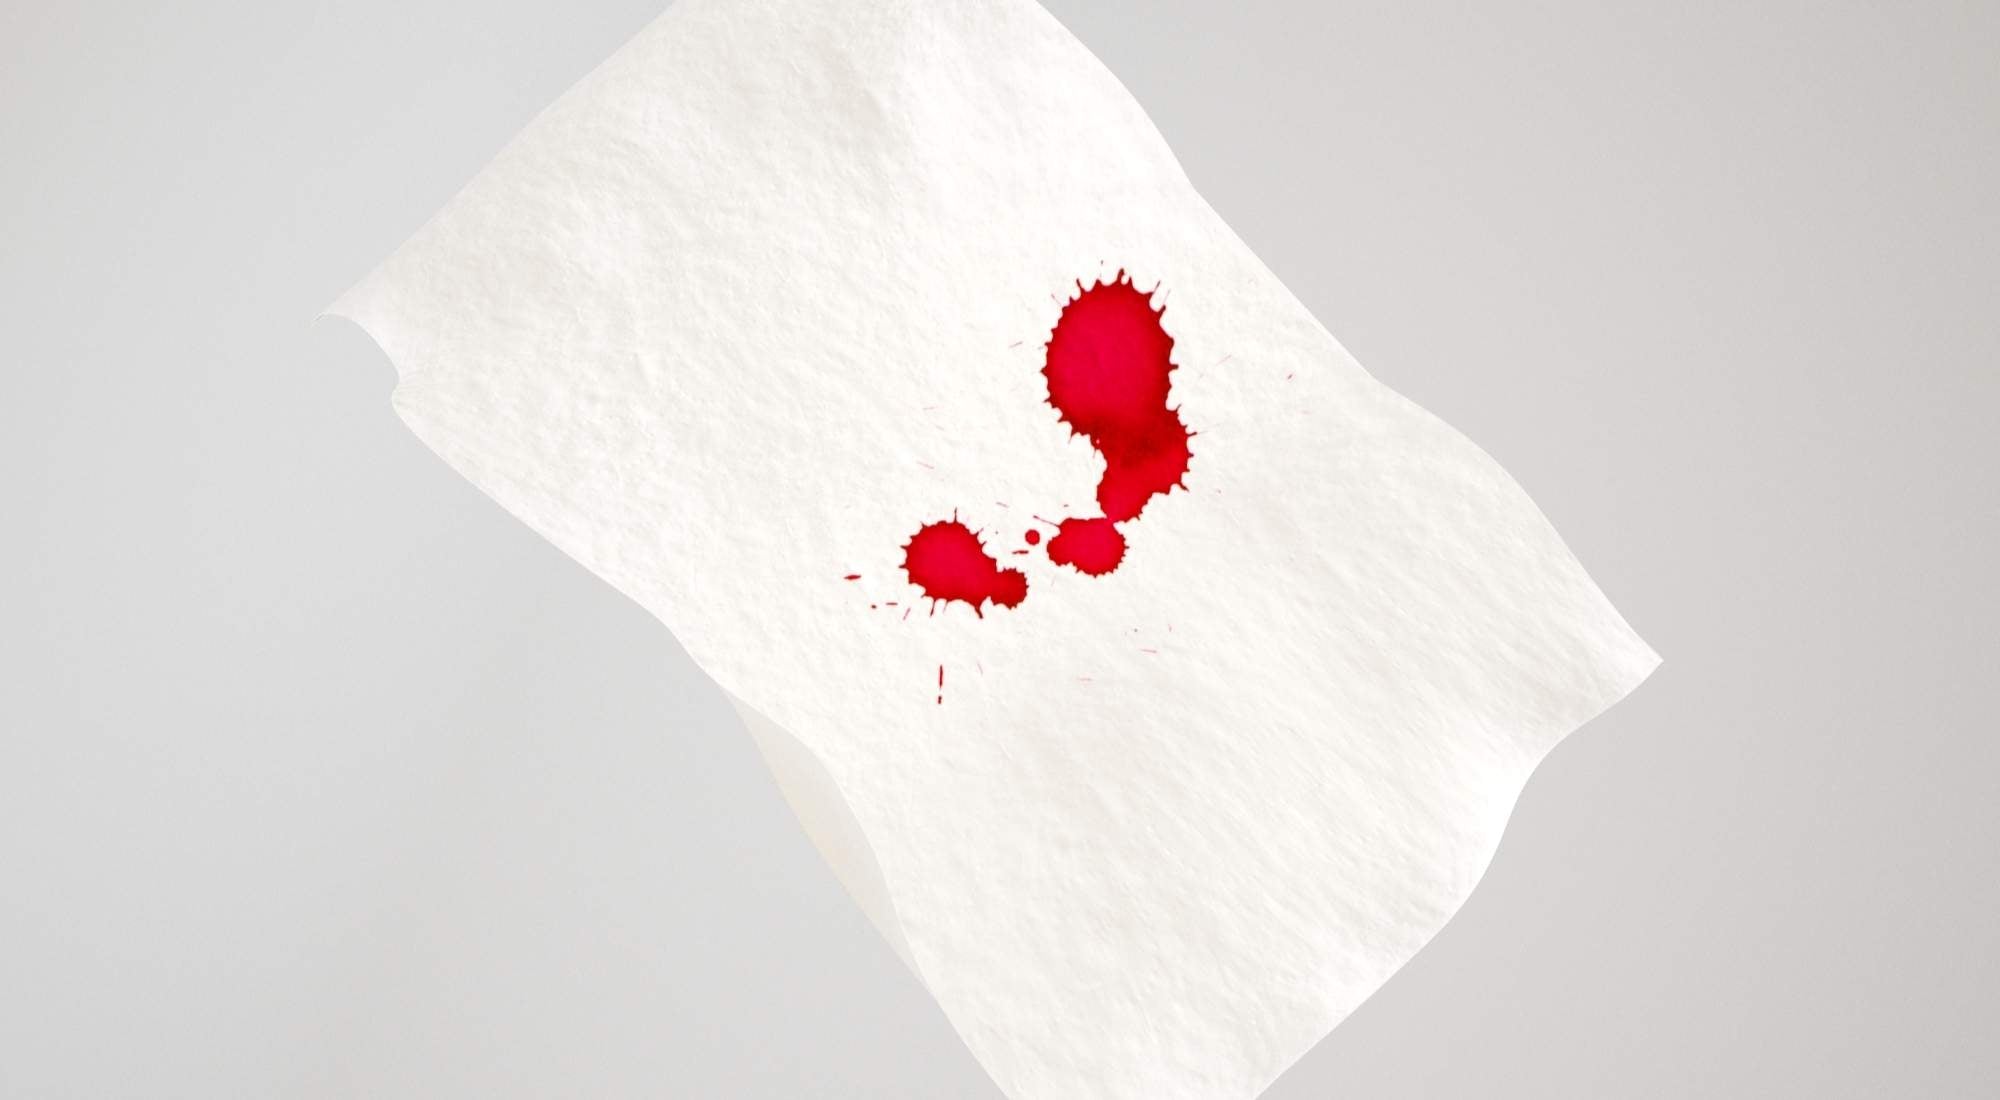 Your Complete Guide to Handling Period Leaks at School